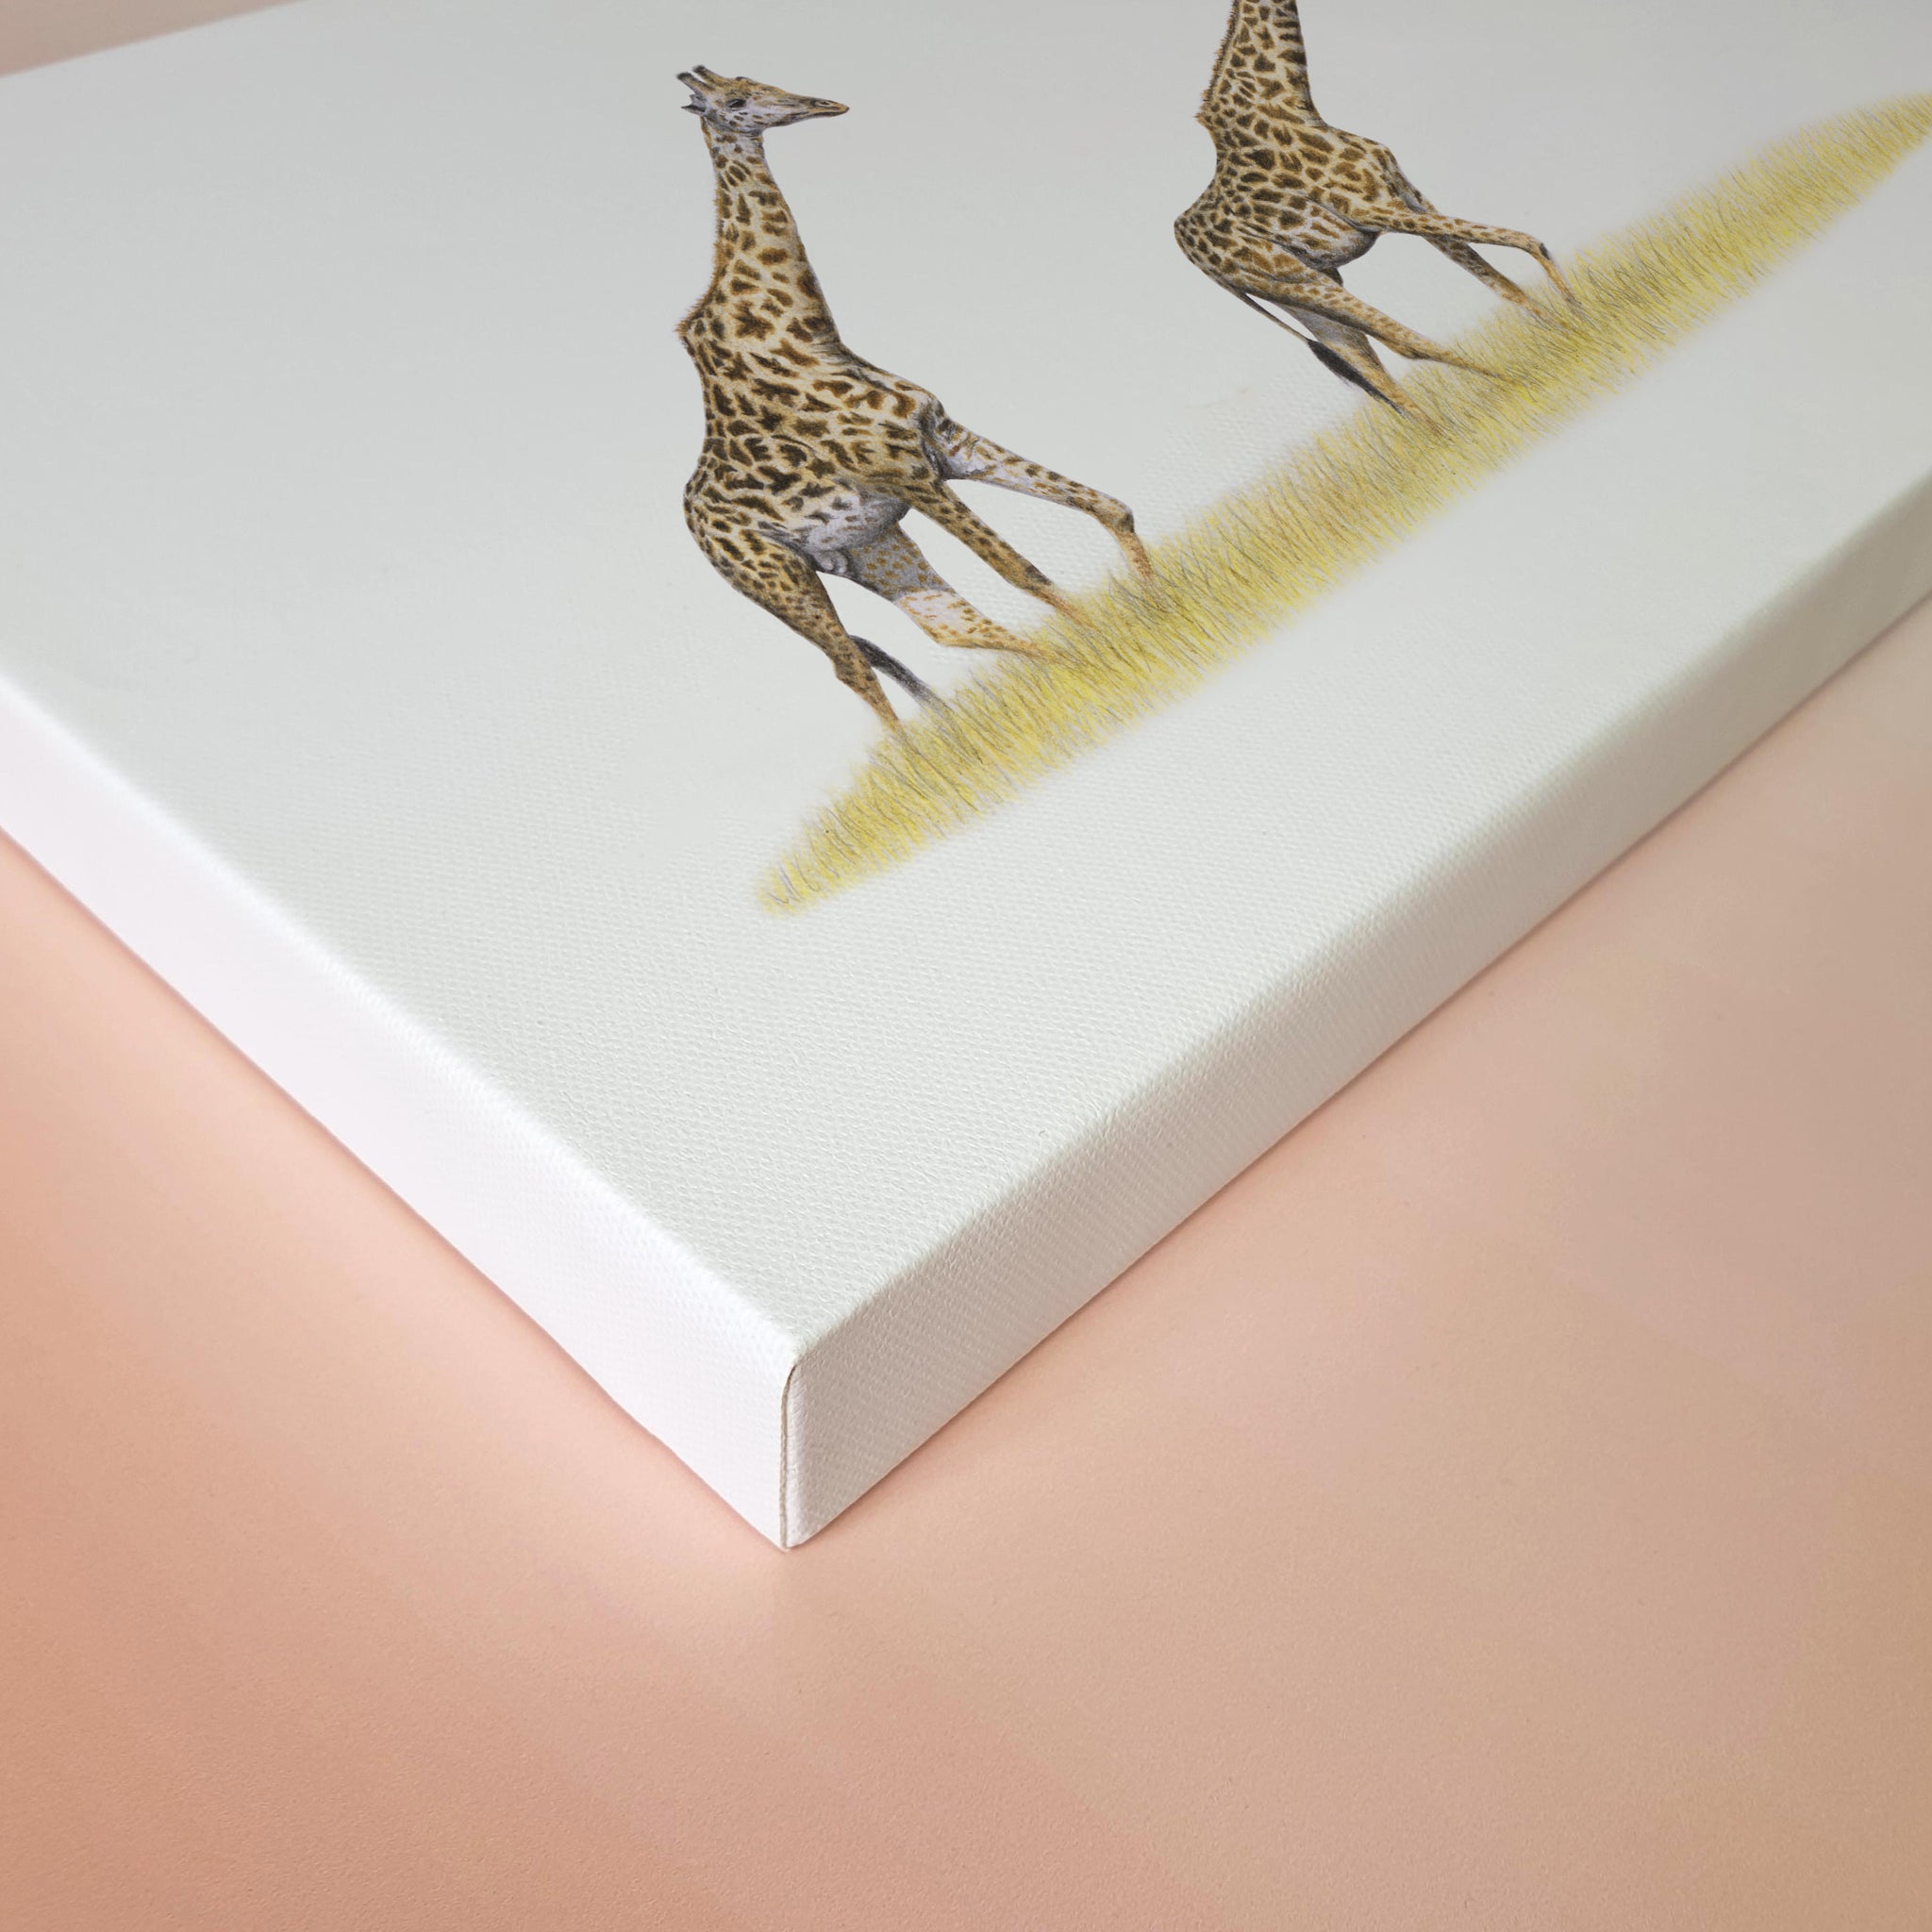 A pair of giraffes walking in the Serengeti artwork print on stretched canvas